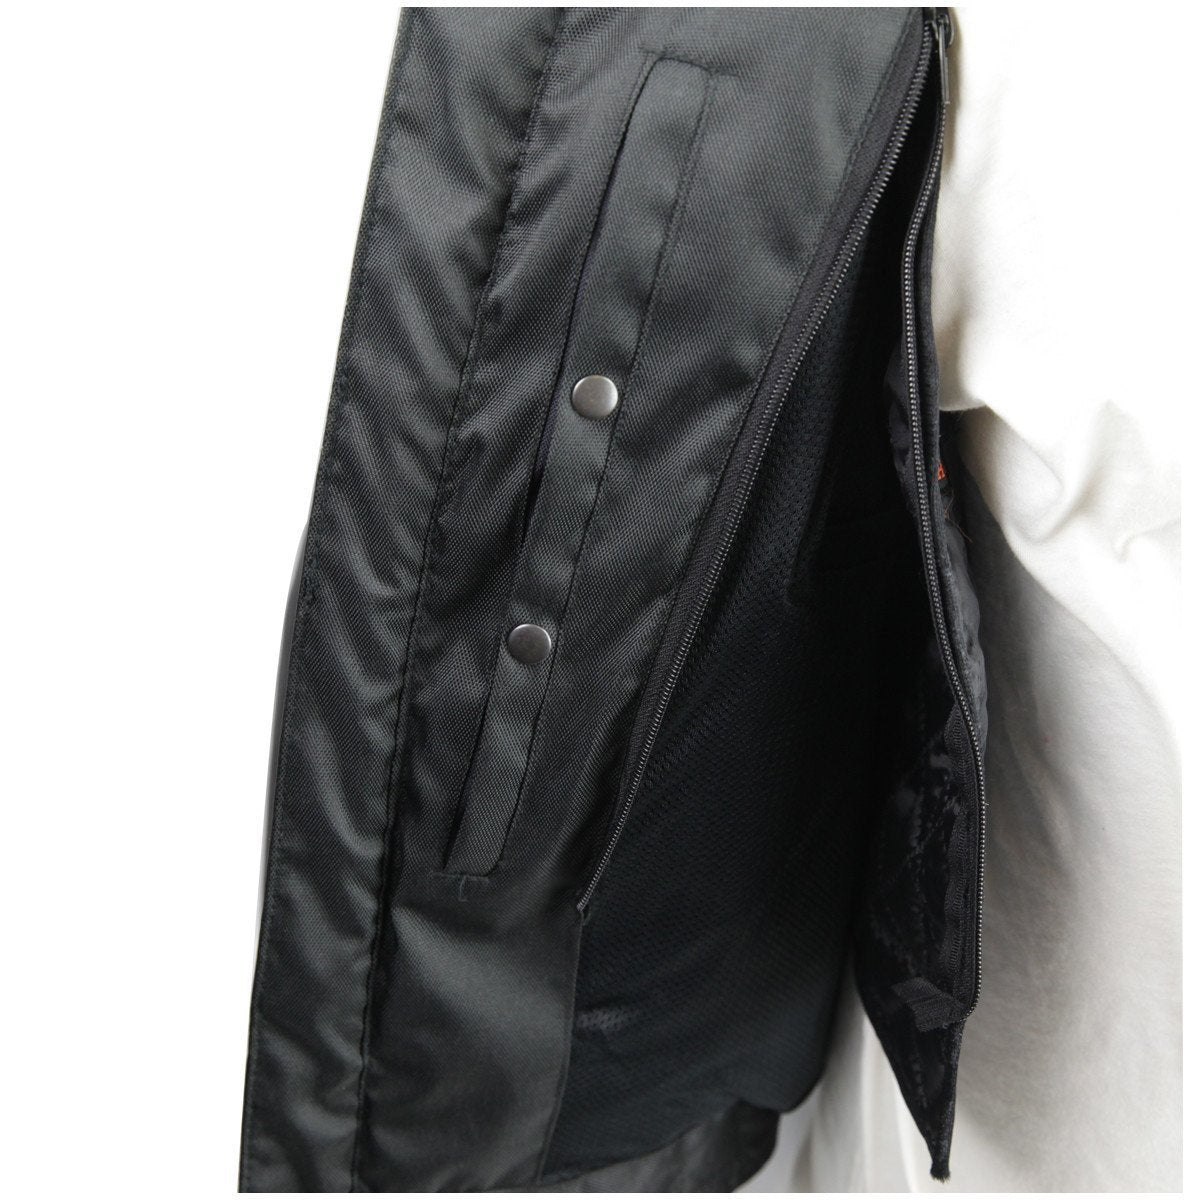 Vance Leather Top Grain Leather Scooter Jacket with Zippered Vents